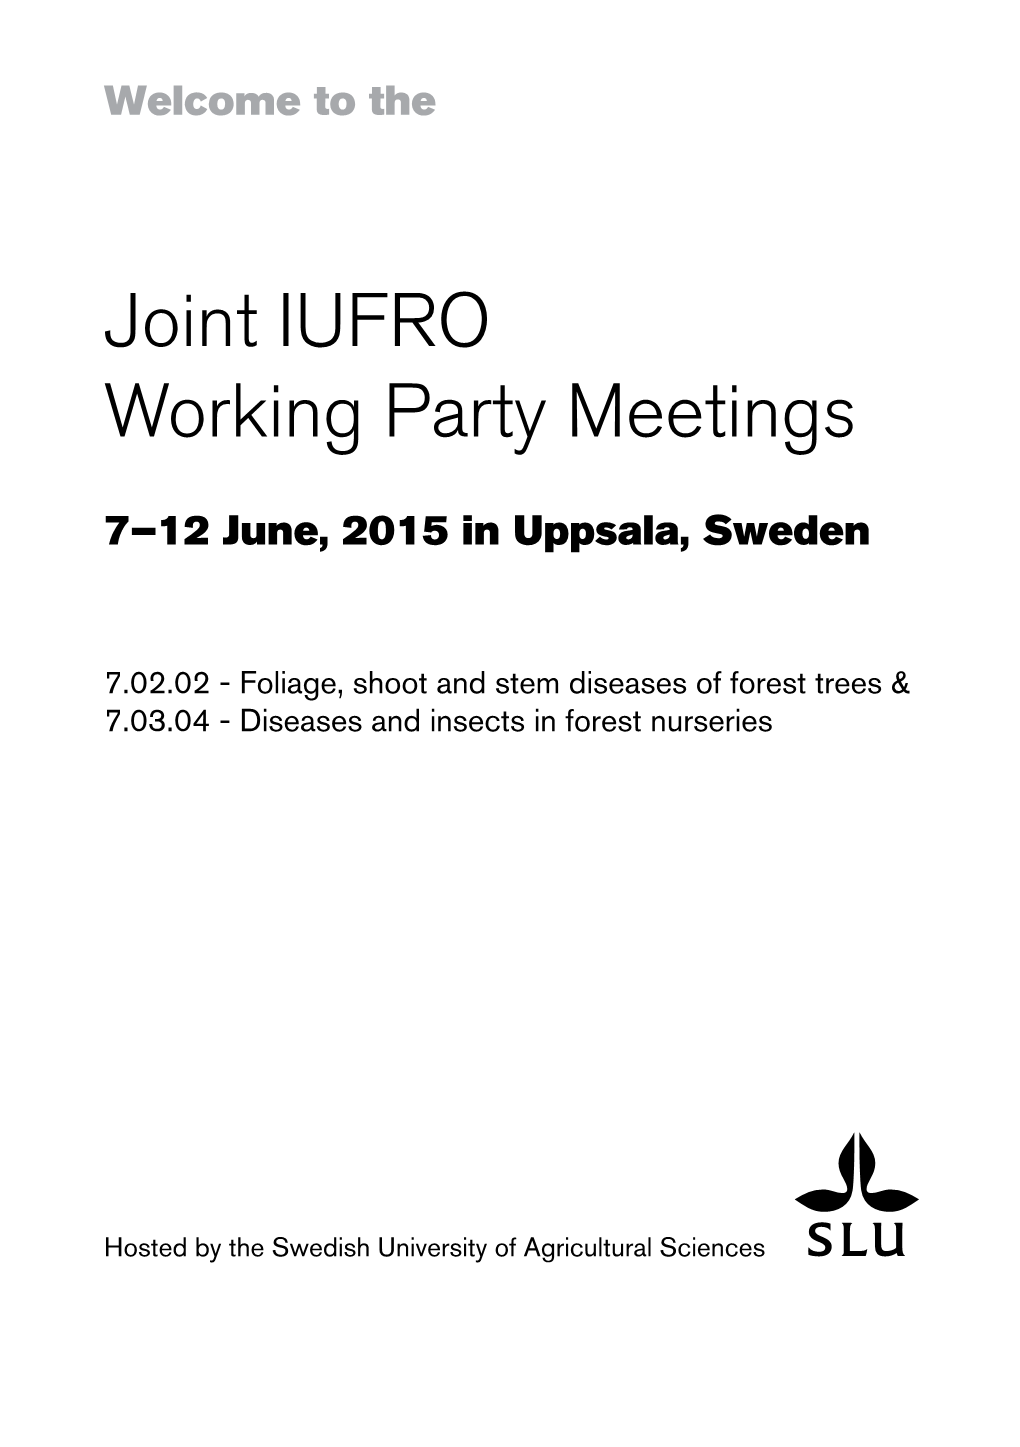 Joint IUFRO Working Party Meetings